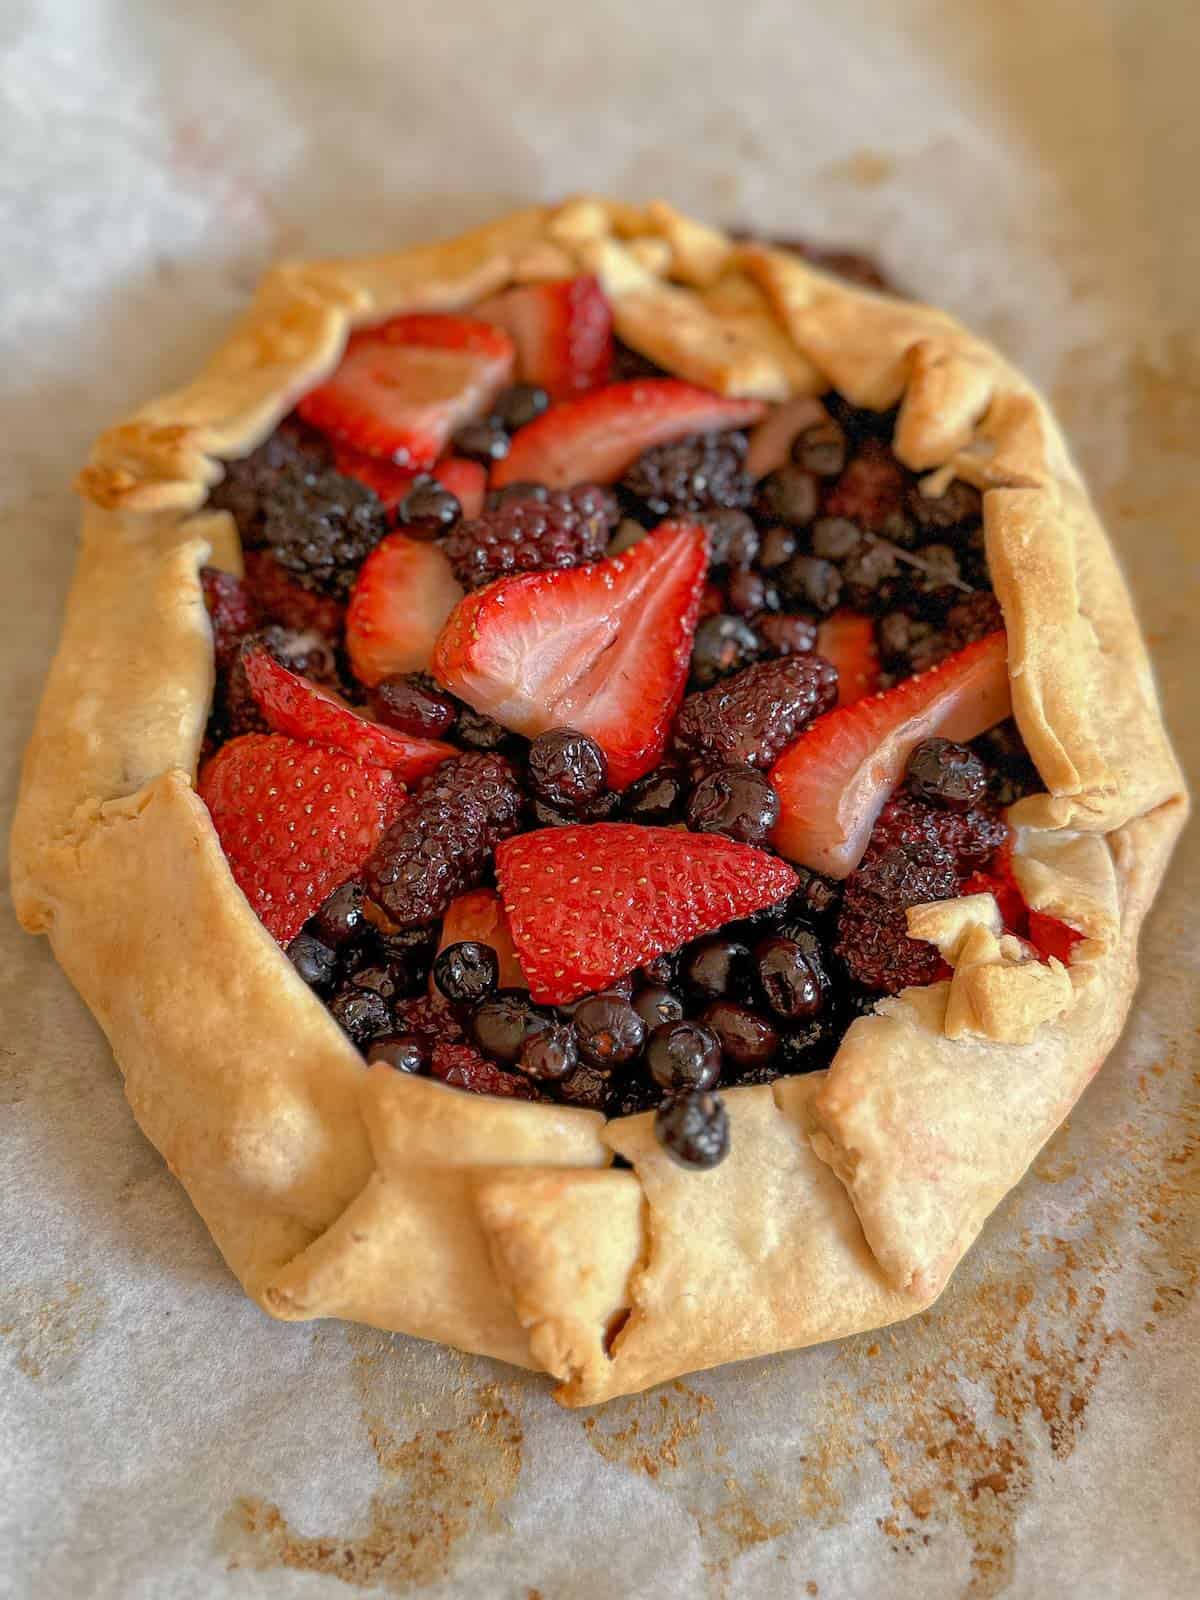 A baked mixed berry galette.